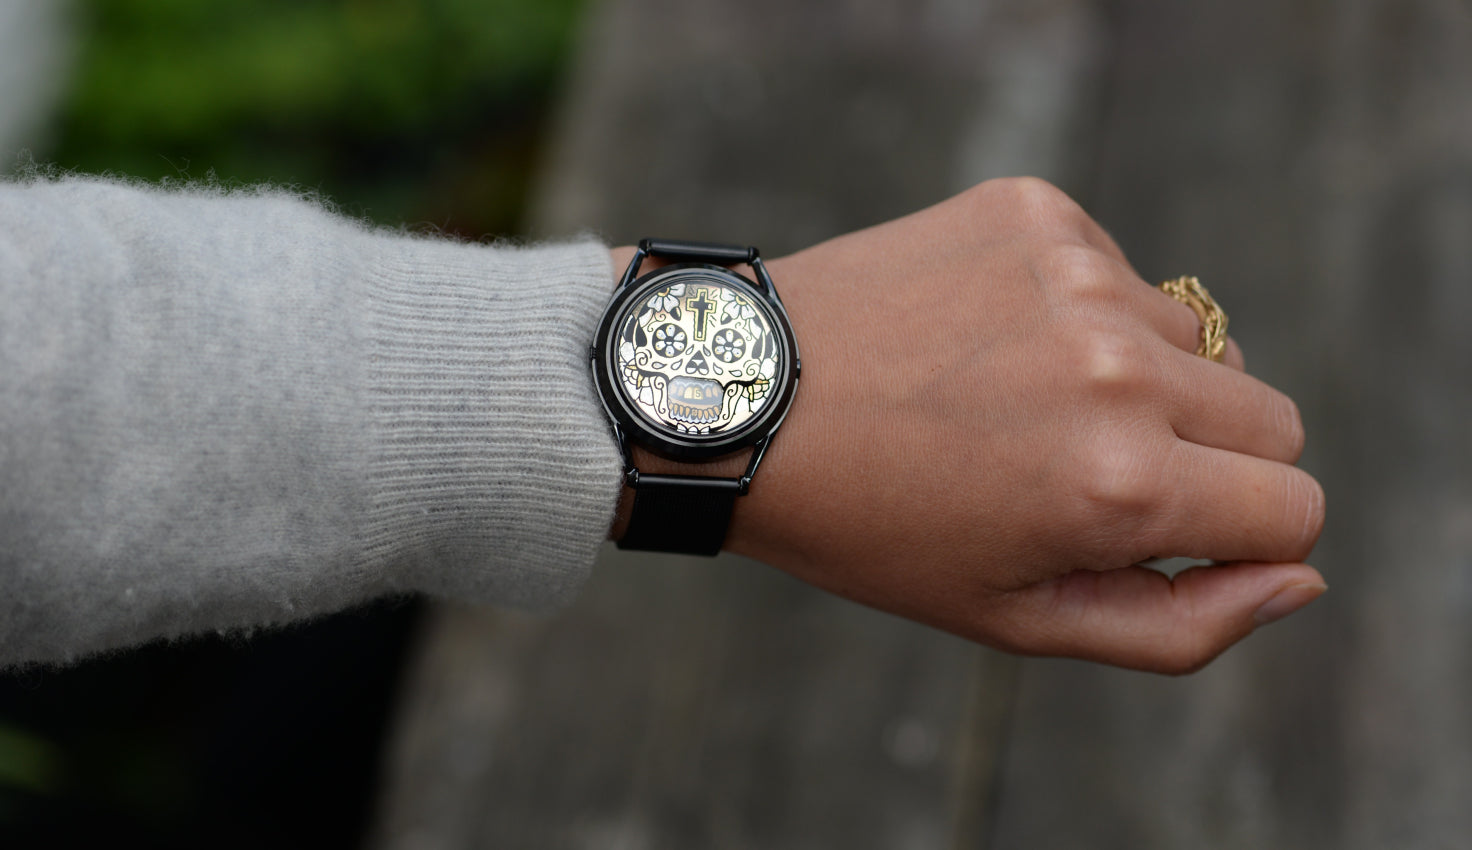 The Gilded Skull watch.